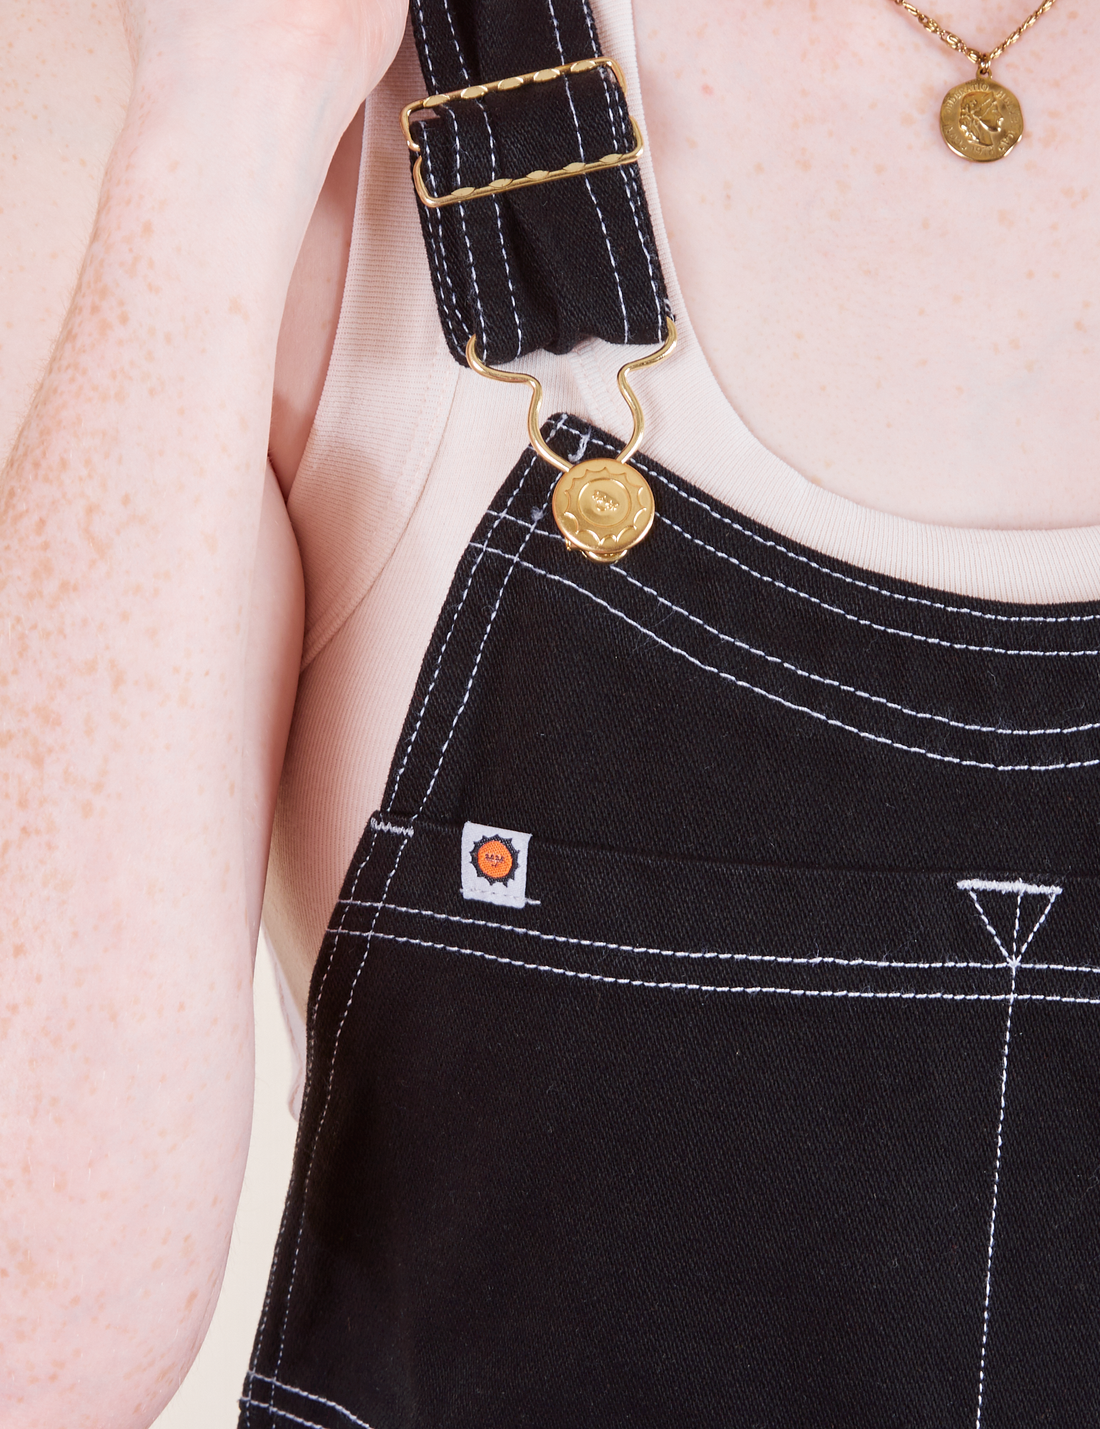 Original Overalls in Basic Black front strap close up featuring gold sun baby button and contrast white stitching